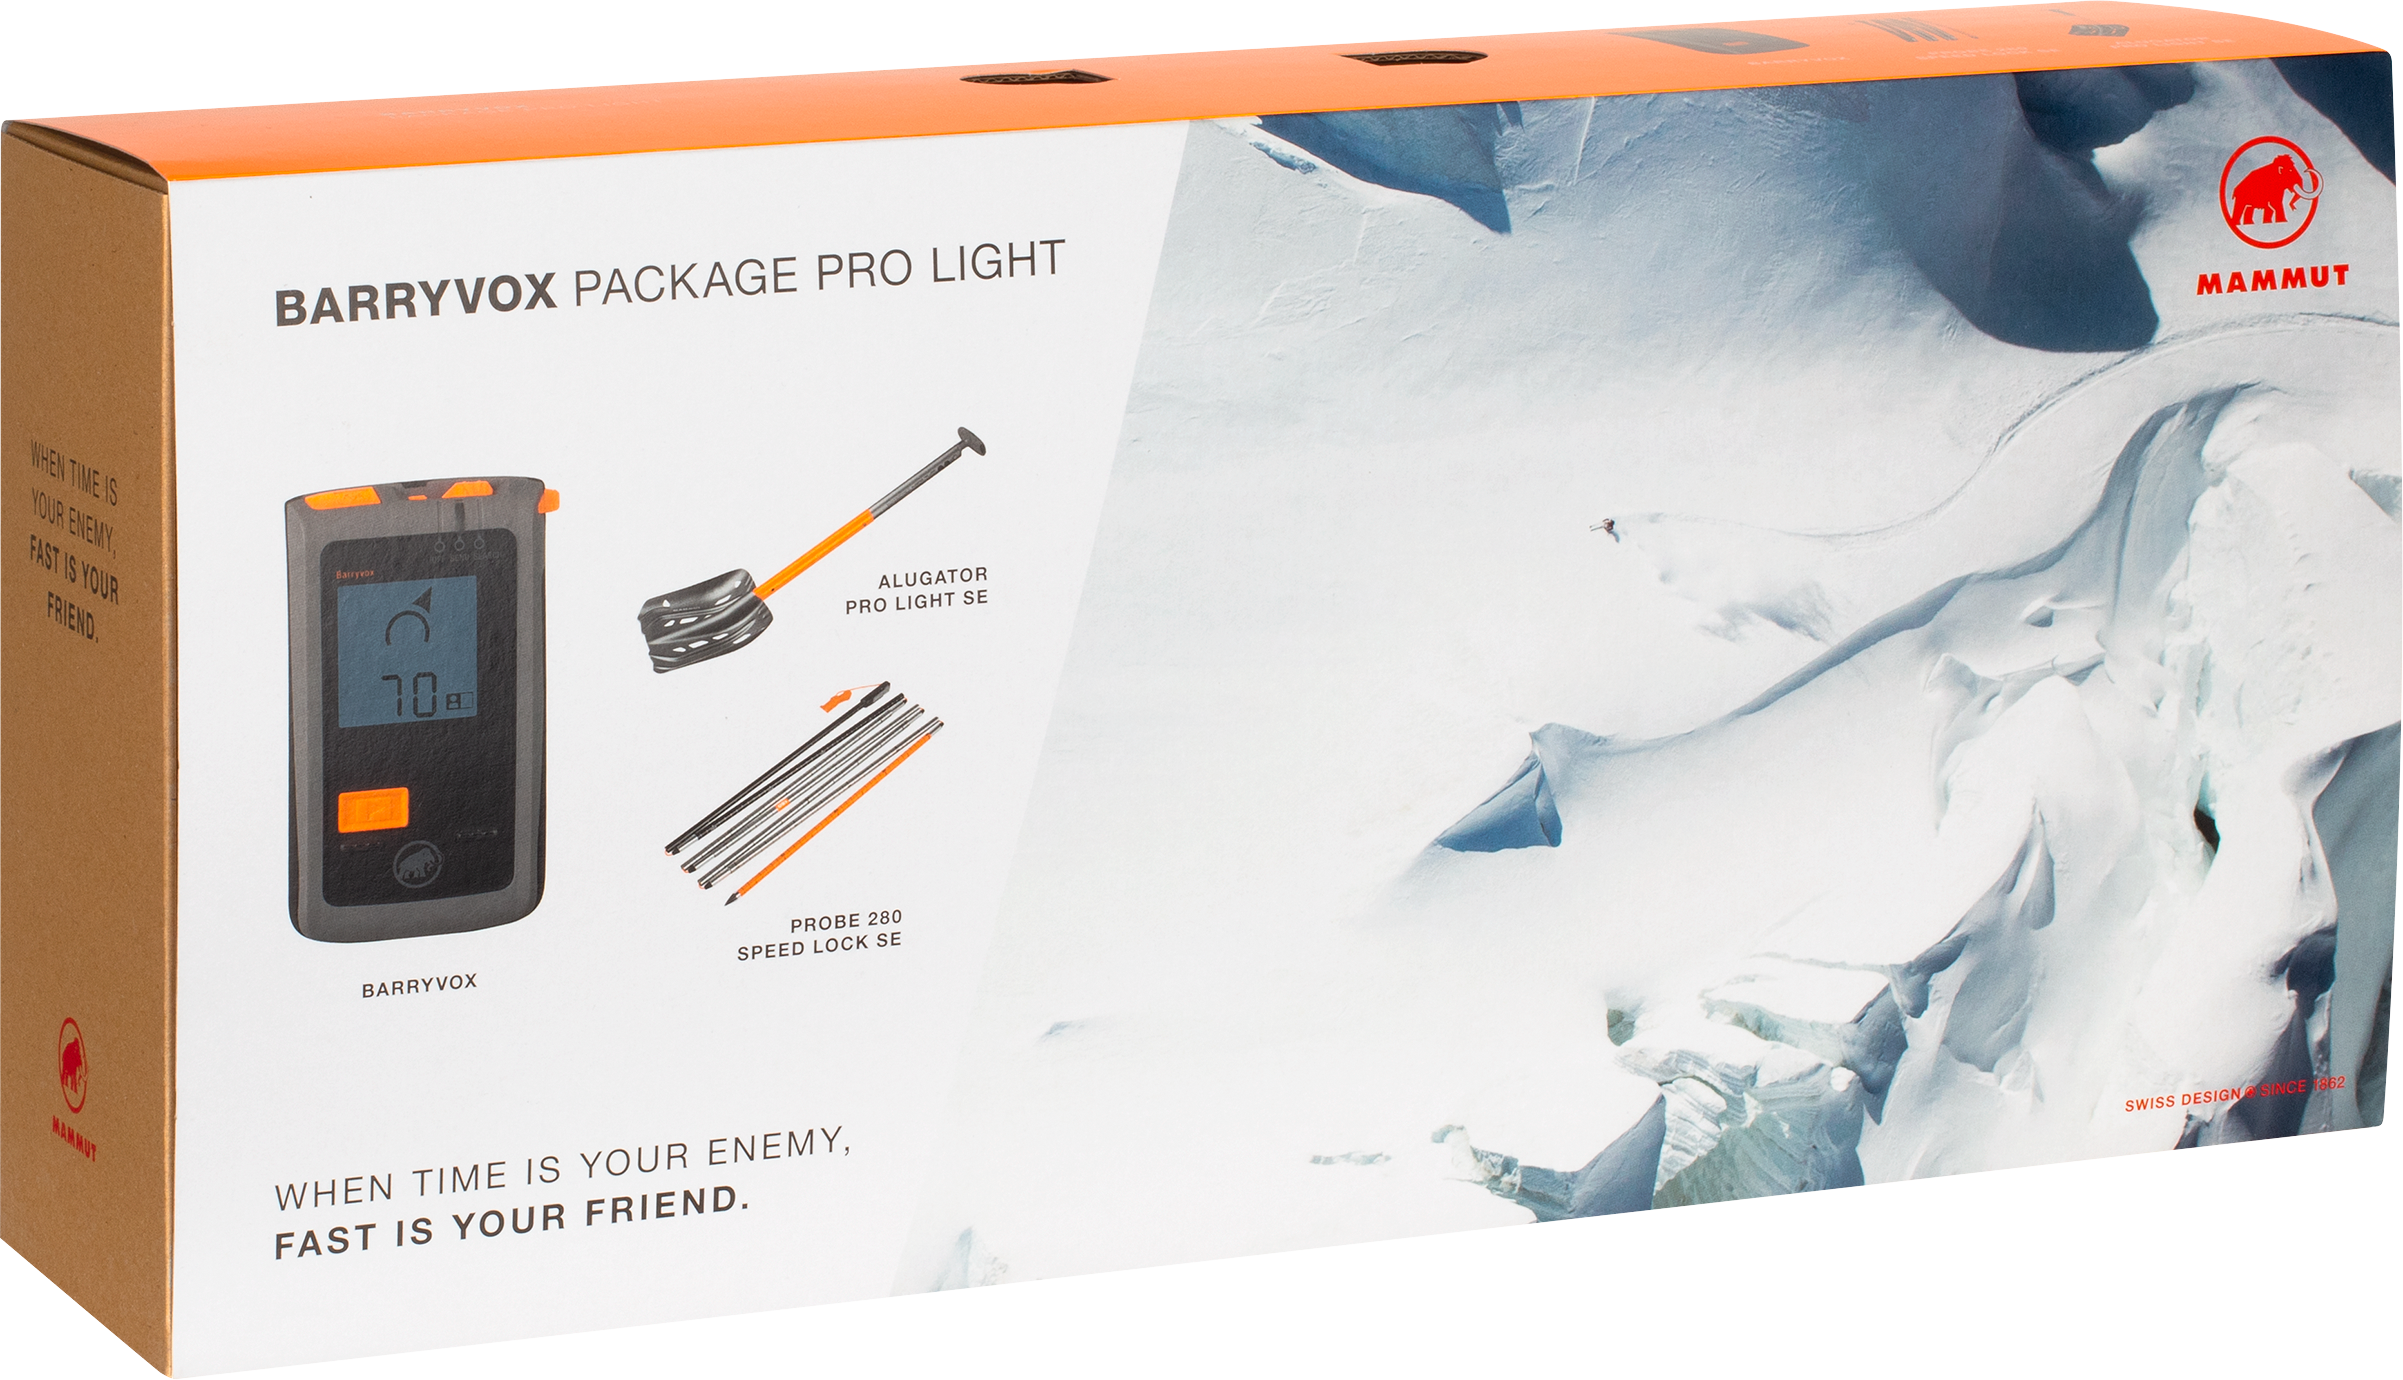 Barryvox Package Pro Light